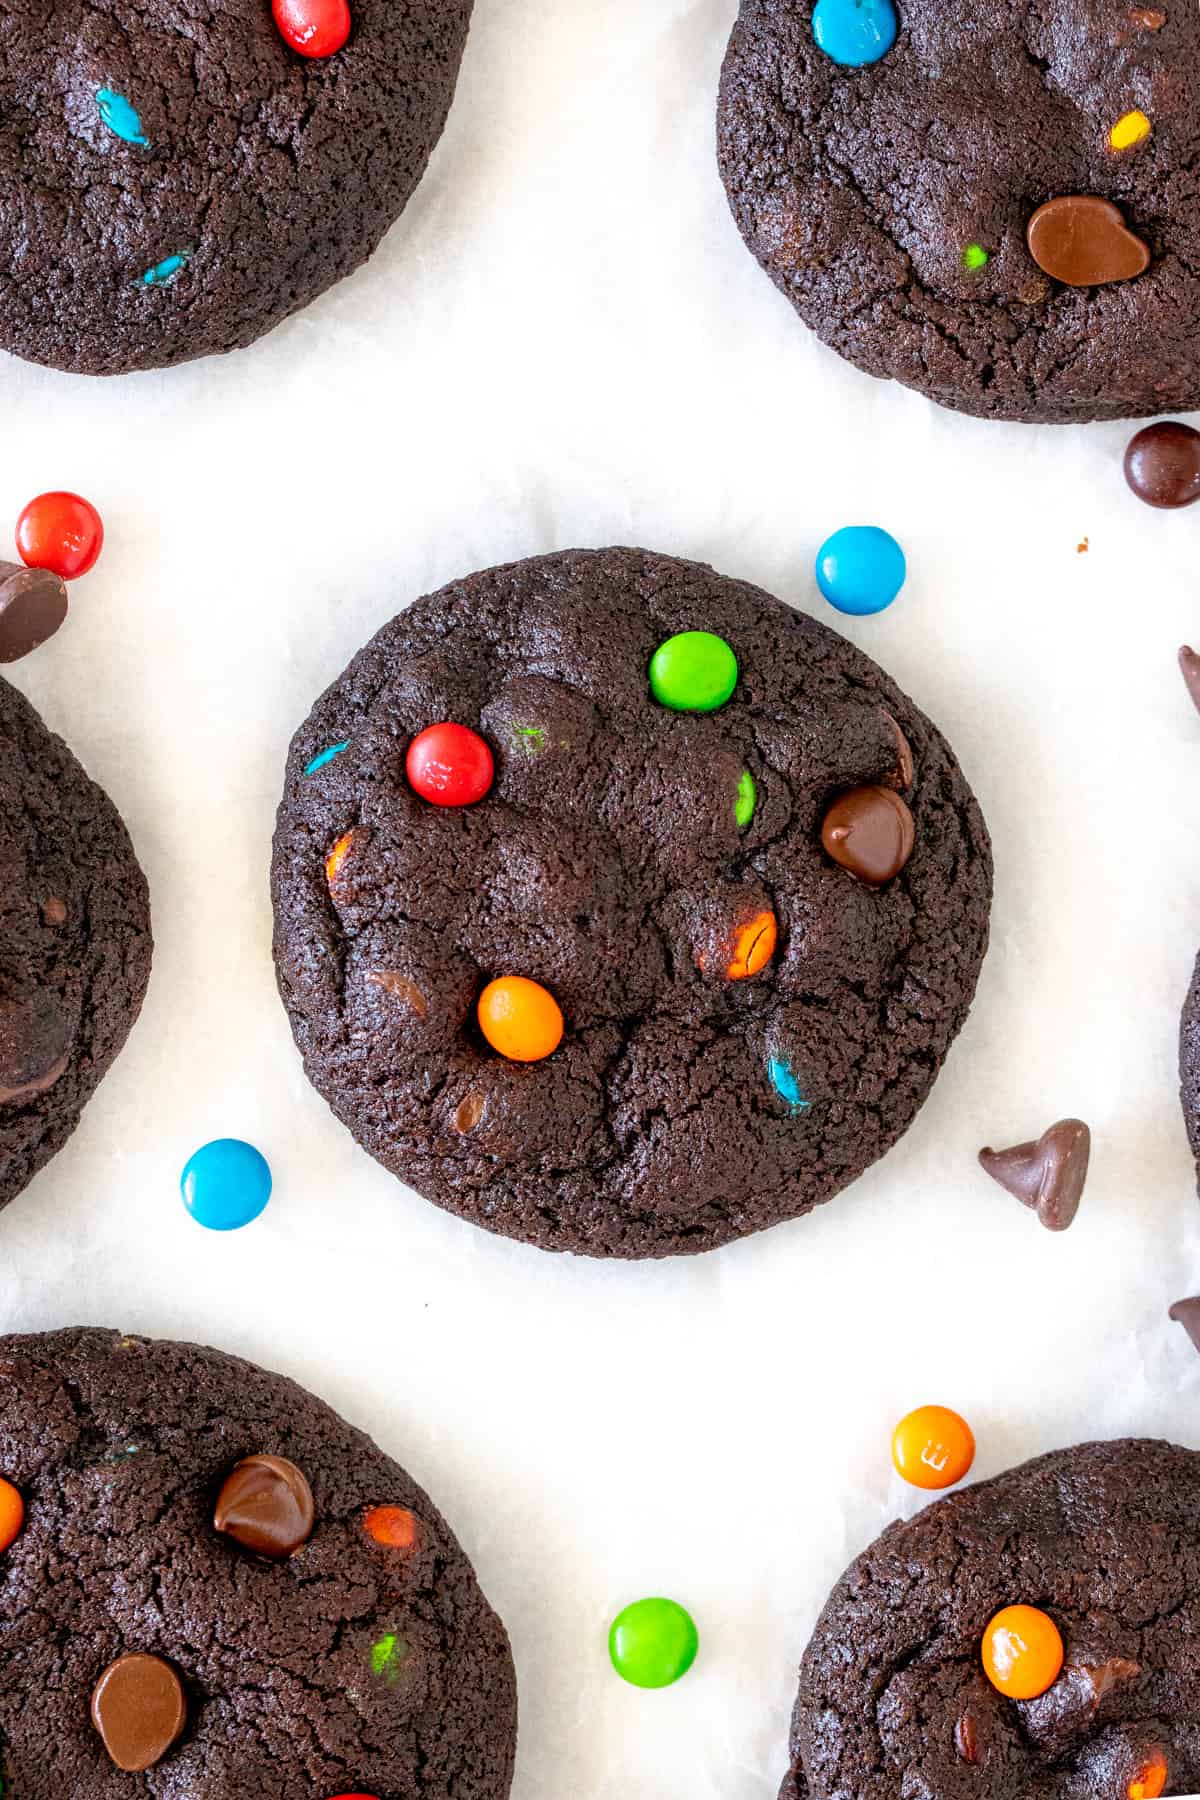 Chocolate cookies with M&Ms and chocolate chips